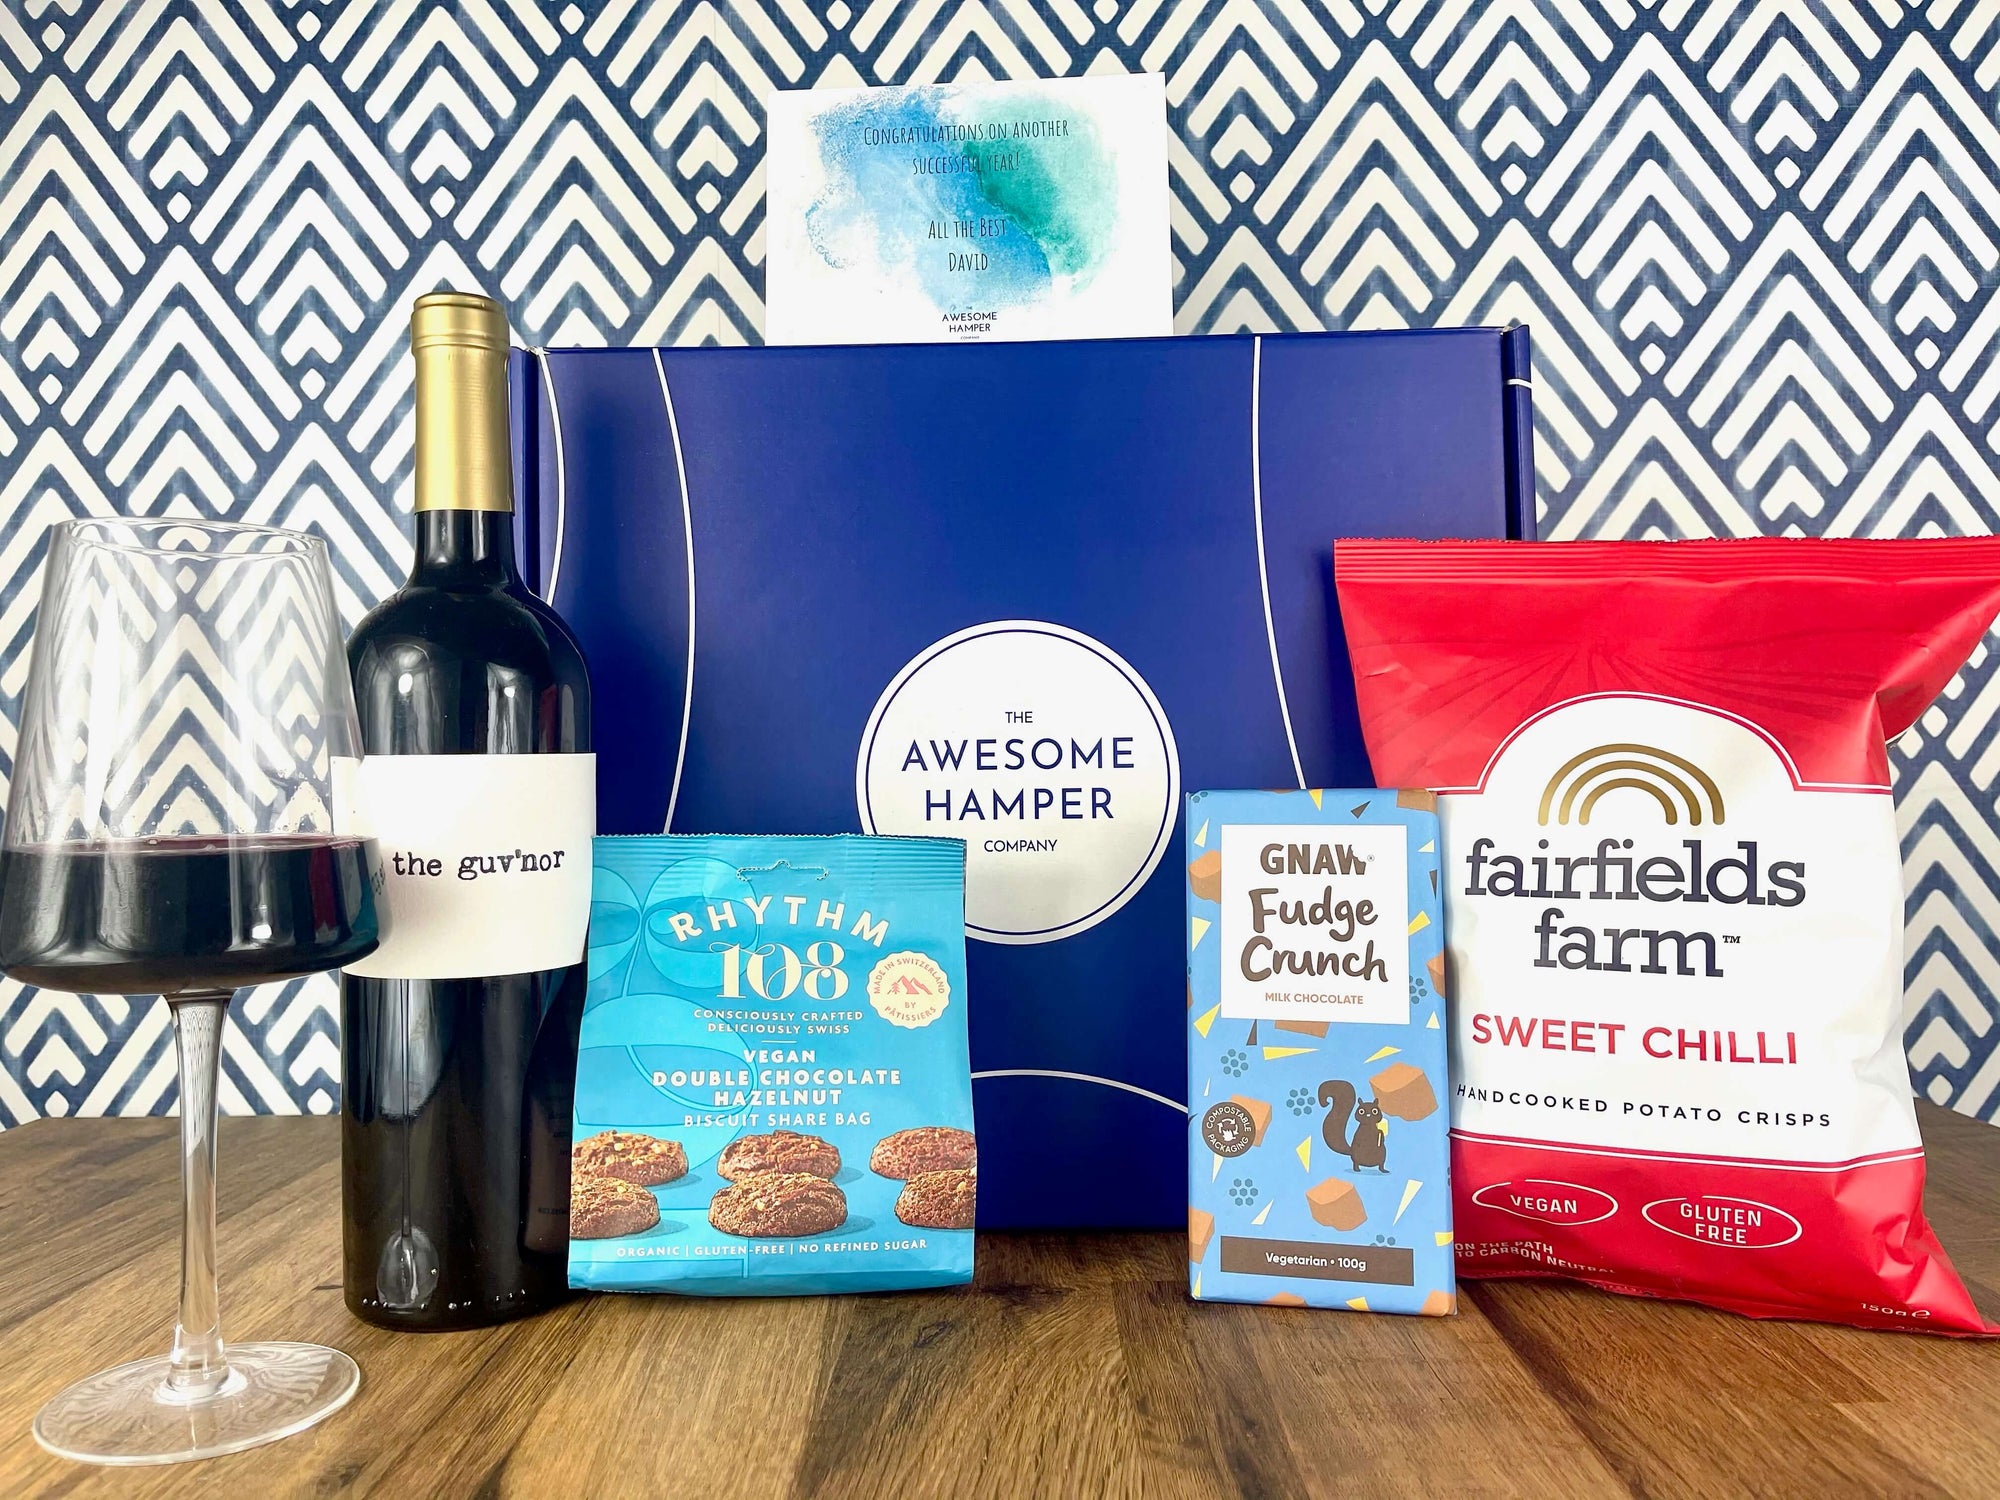 Red Wine & Nibbles Gift Box